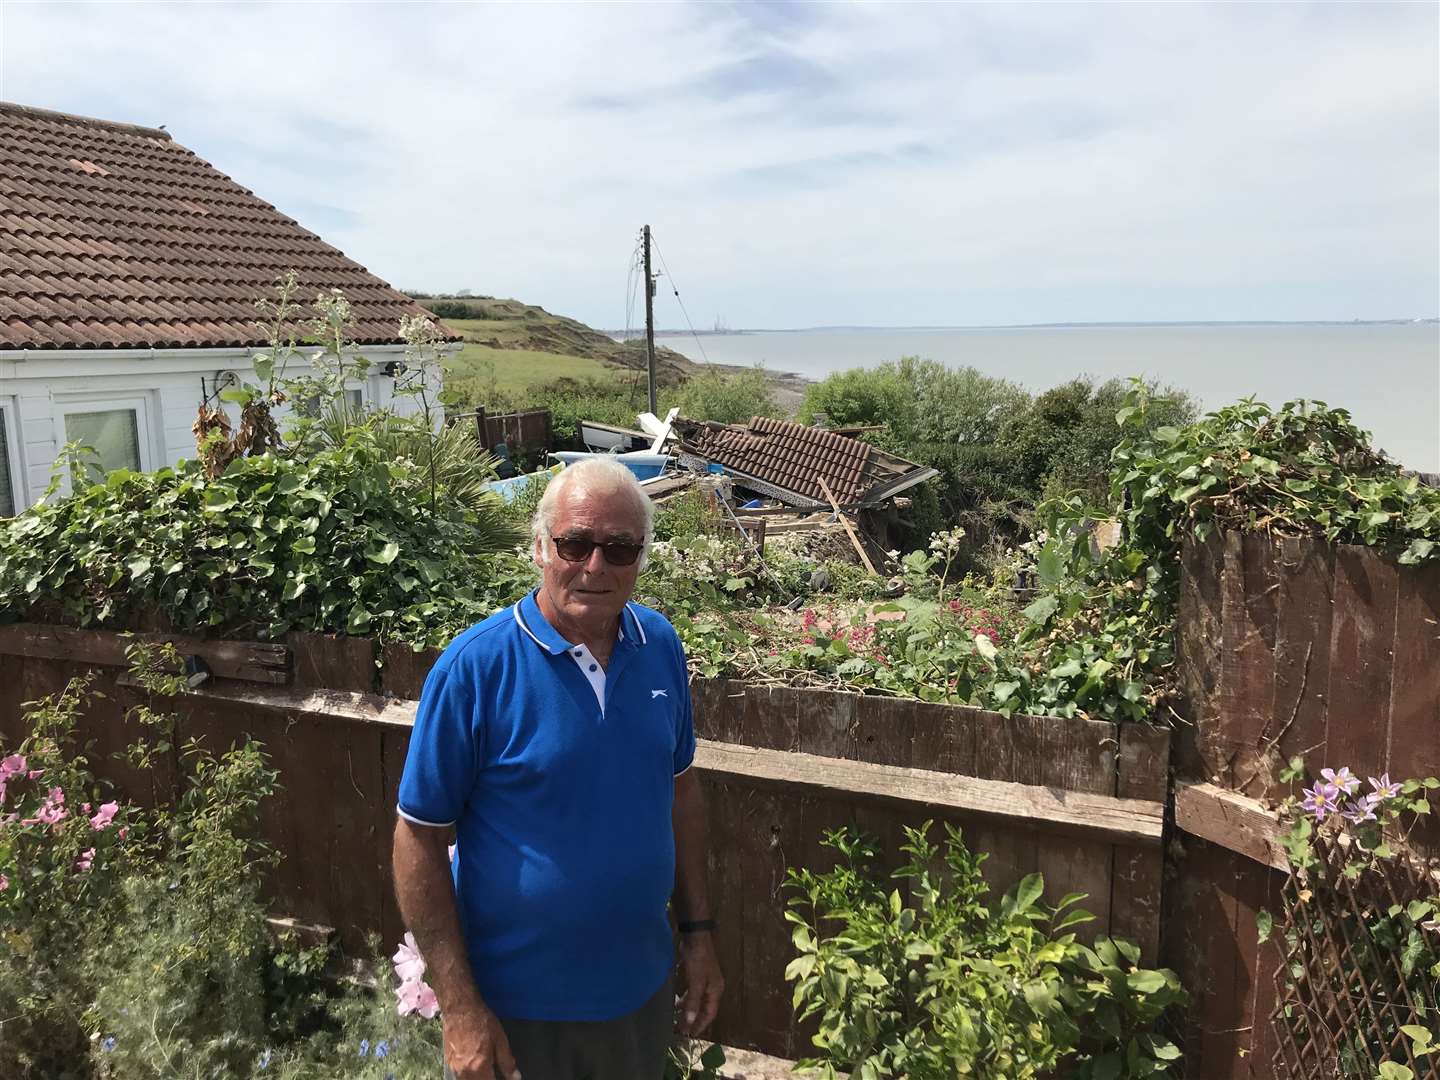 Ed Cane whose house backs onto Cliffhanger, which fell off the cliff at Eastchurch